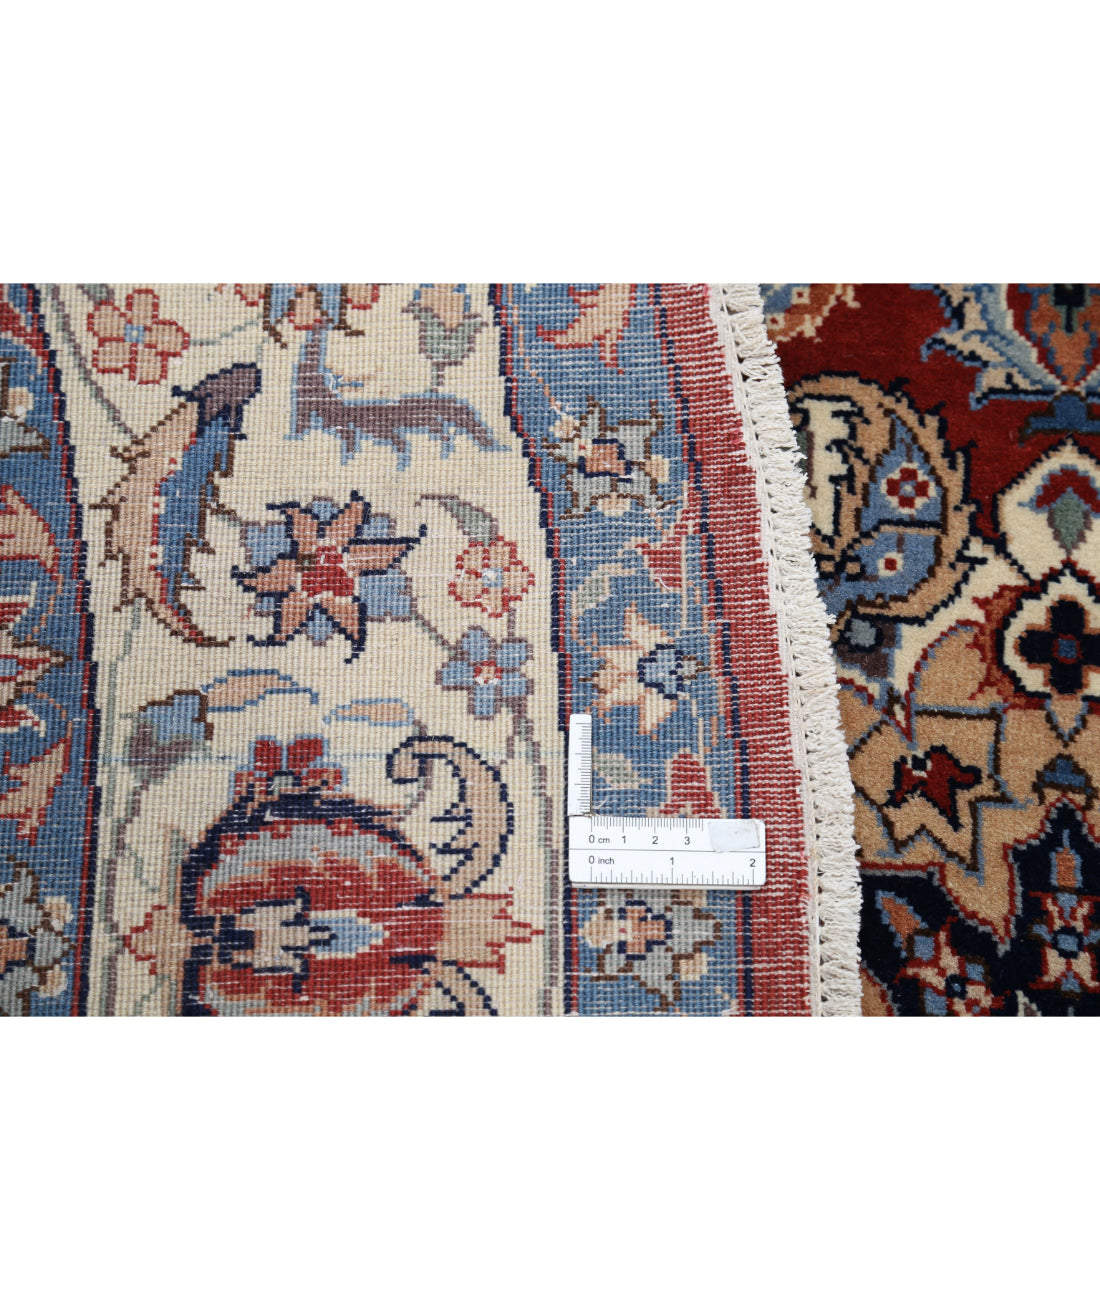 Hand Knotted Heritage Persian Style Wool Rug - 6'5'' x 6'6'' 6'5'' x 6'6'' (193 X 195) / Red / Ivory